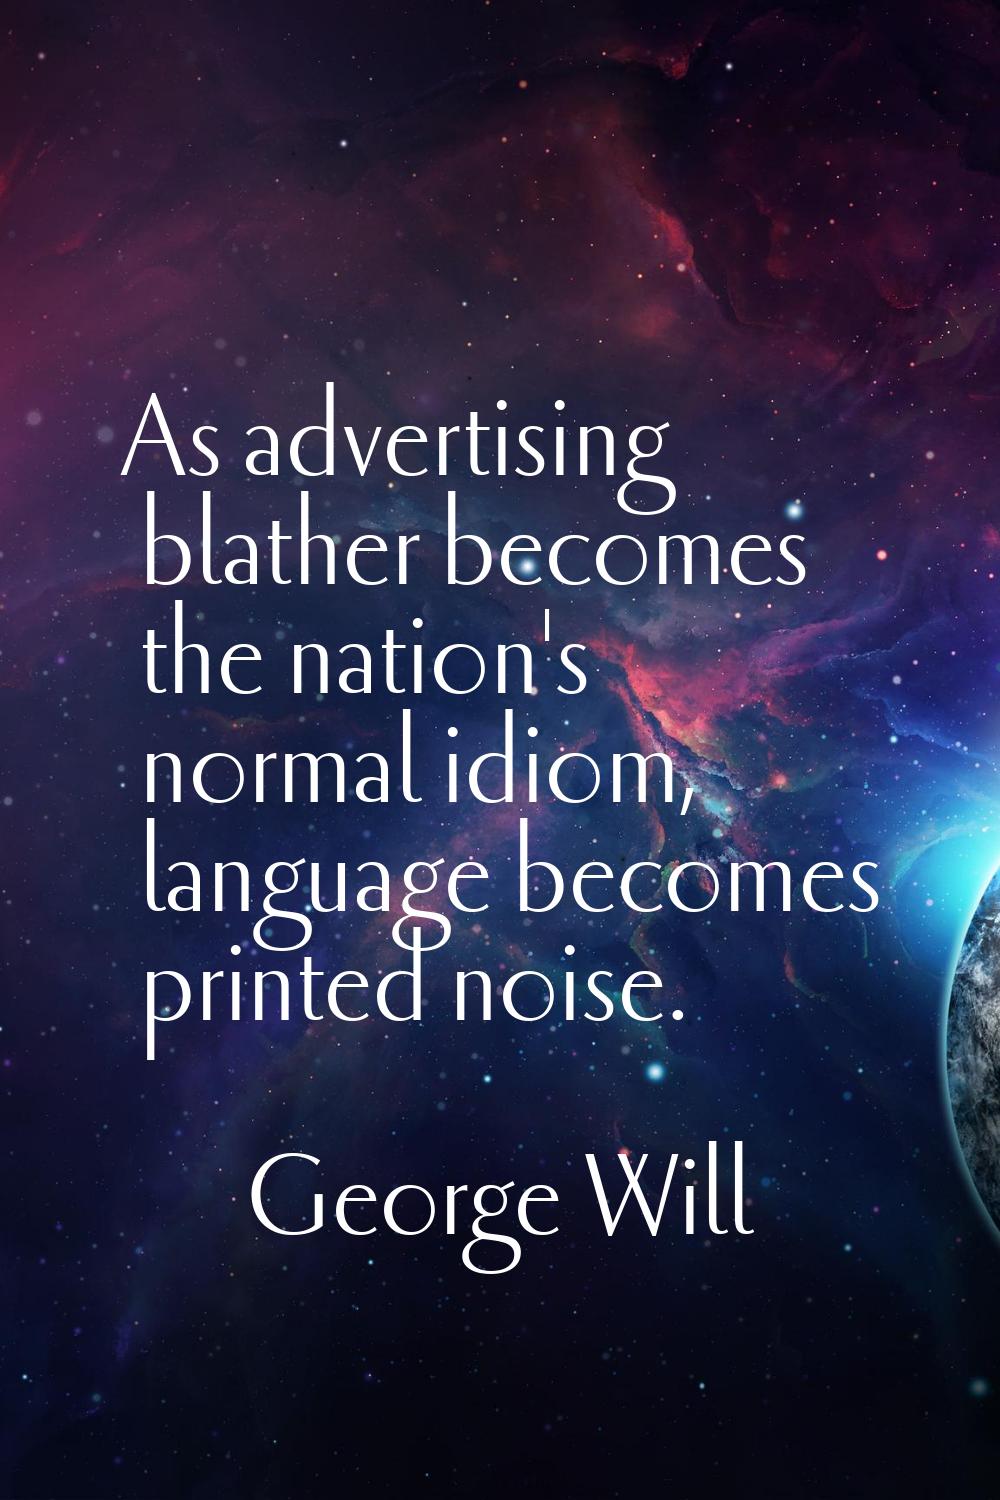 As advertising blather becomes the nation's normal idiom, language becomes printed noise.